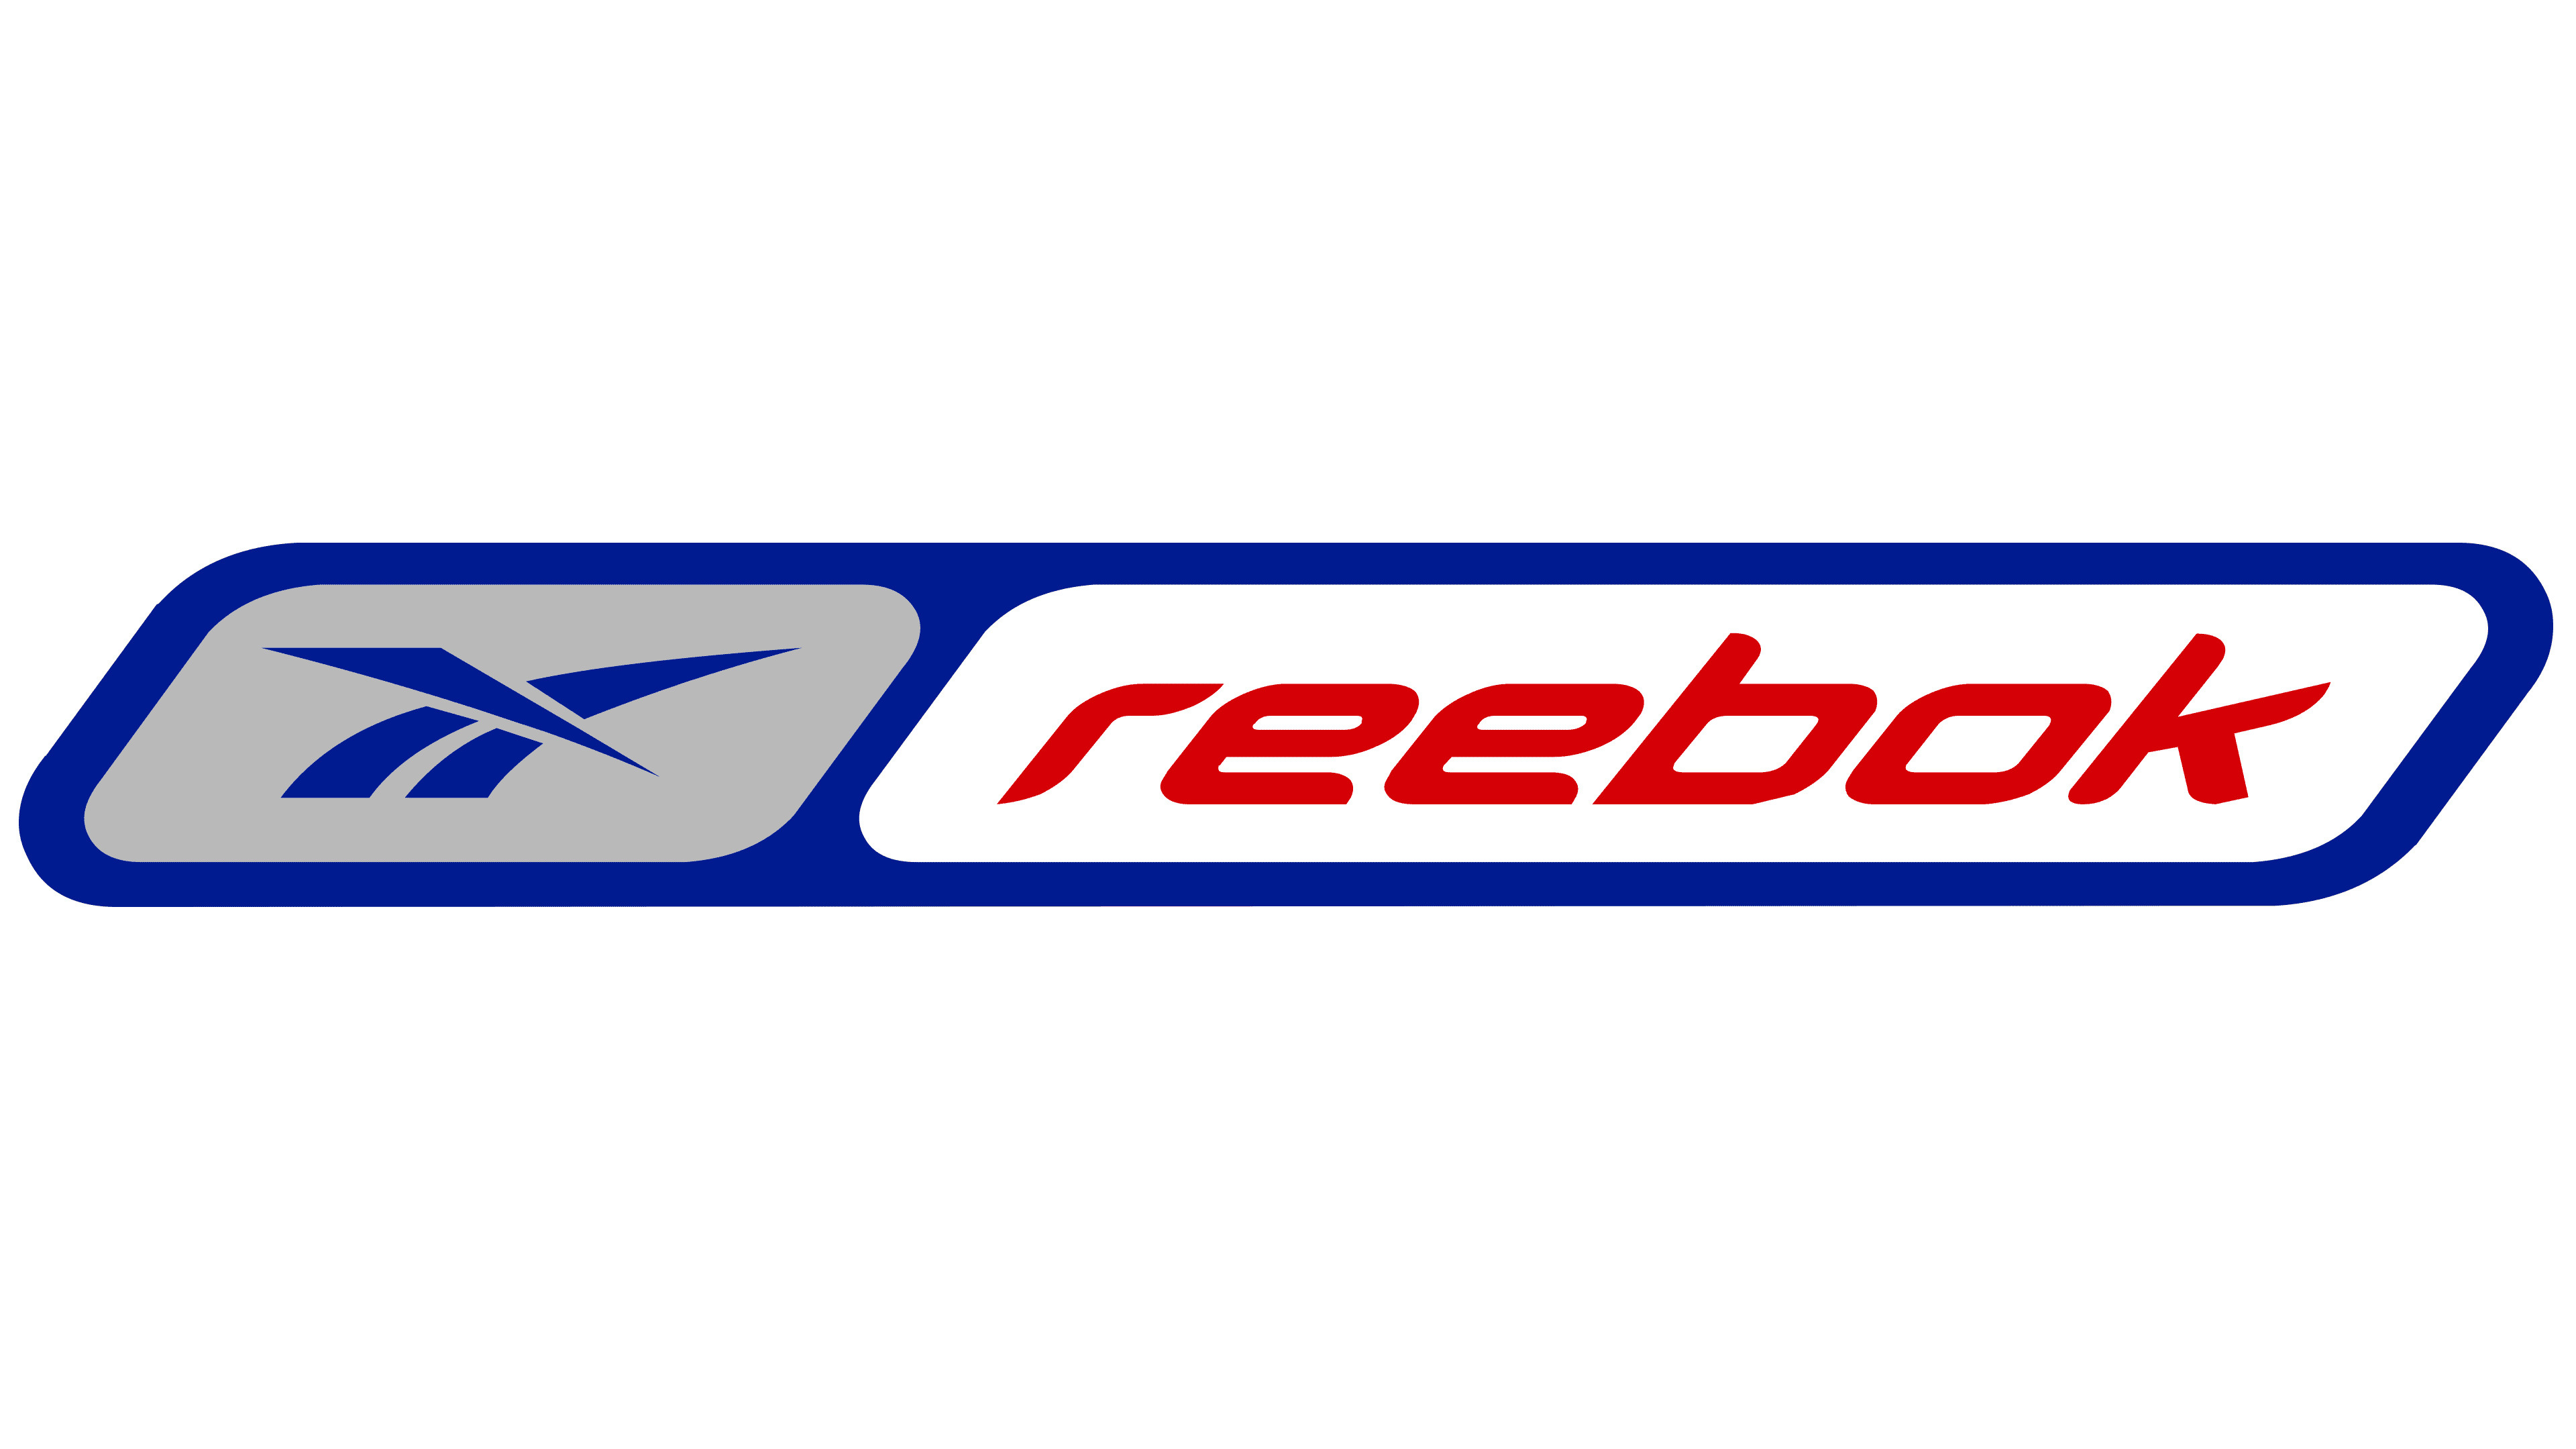 Reebok: A company that designs and manufactures athletic and lifestyle footwear, apparel and equipment. 3840x2160 4K Background.